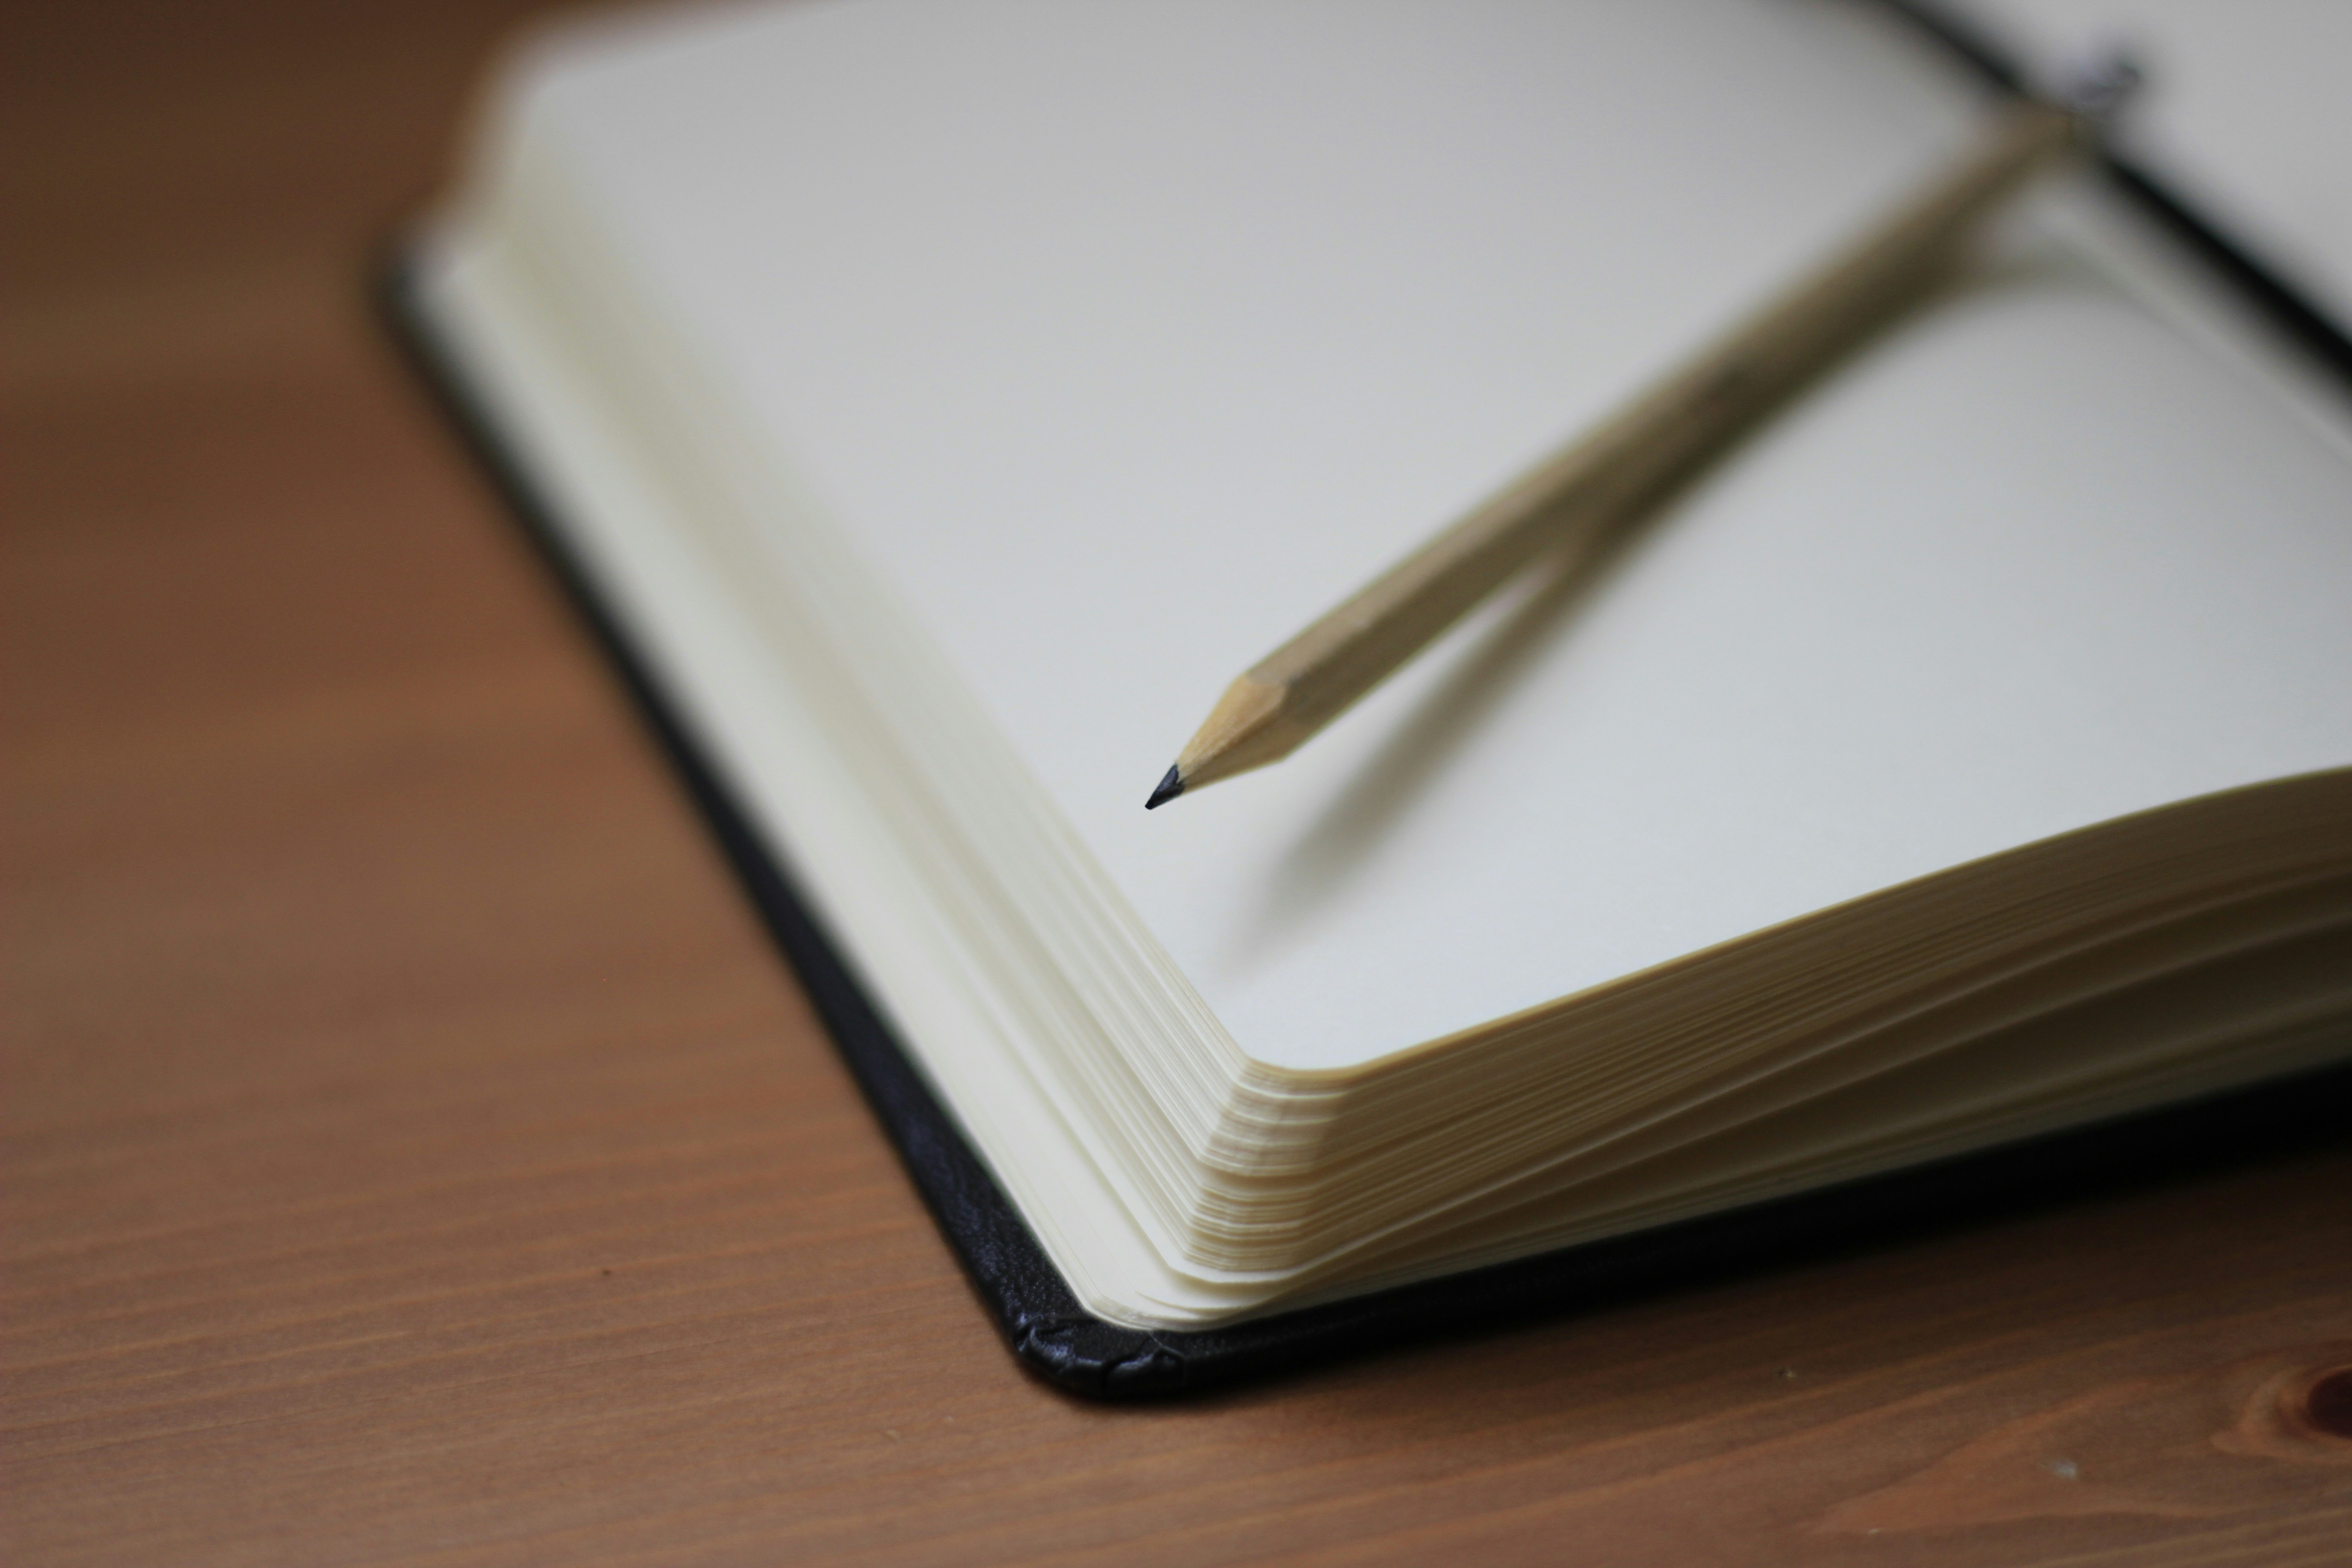 A shallow focus image of a notebook with a pencil on it.